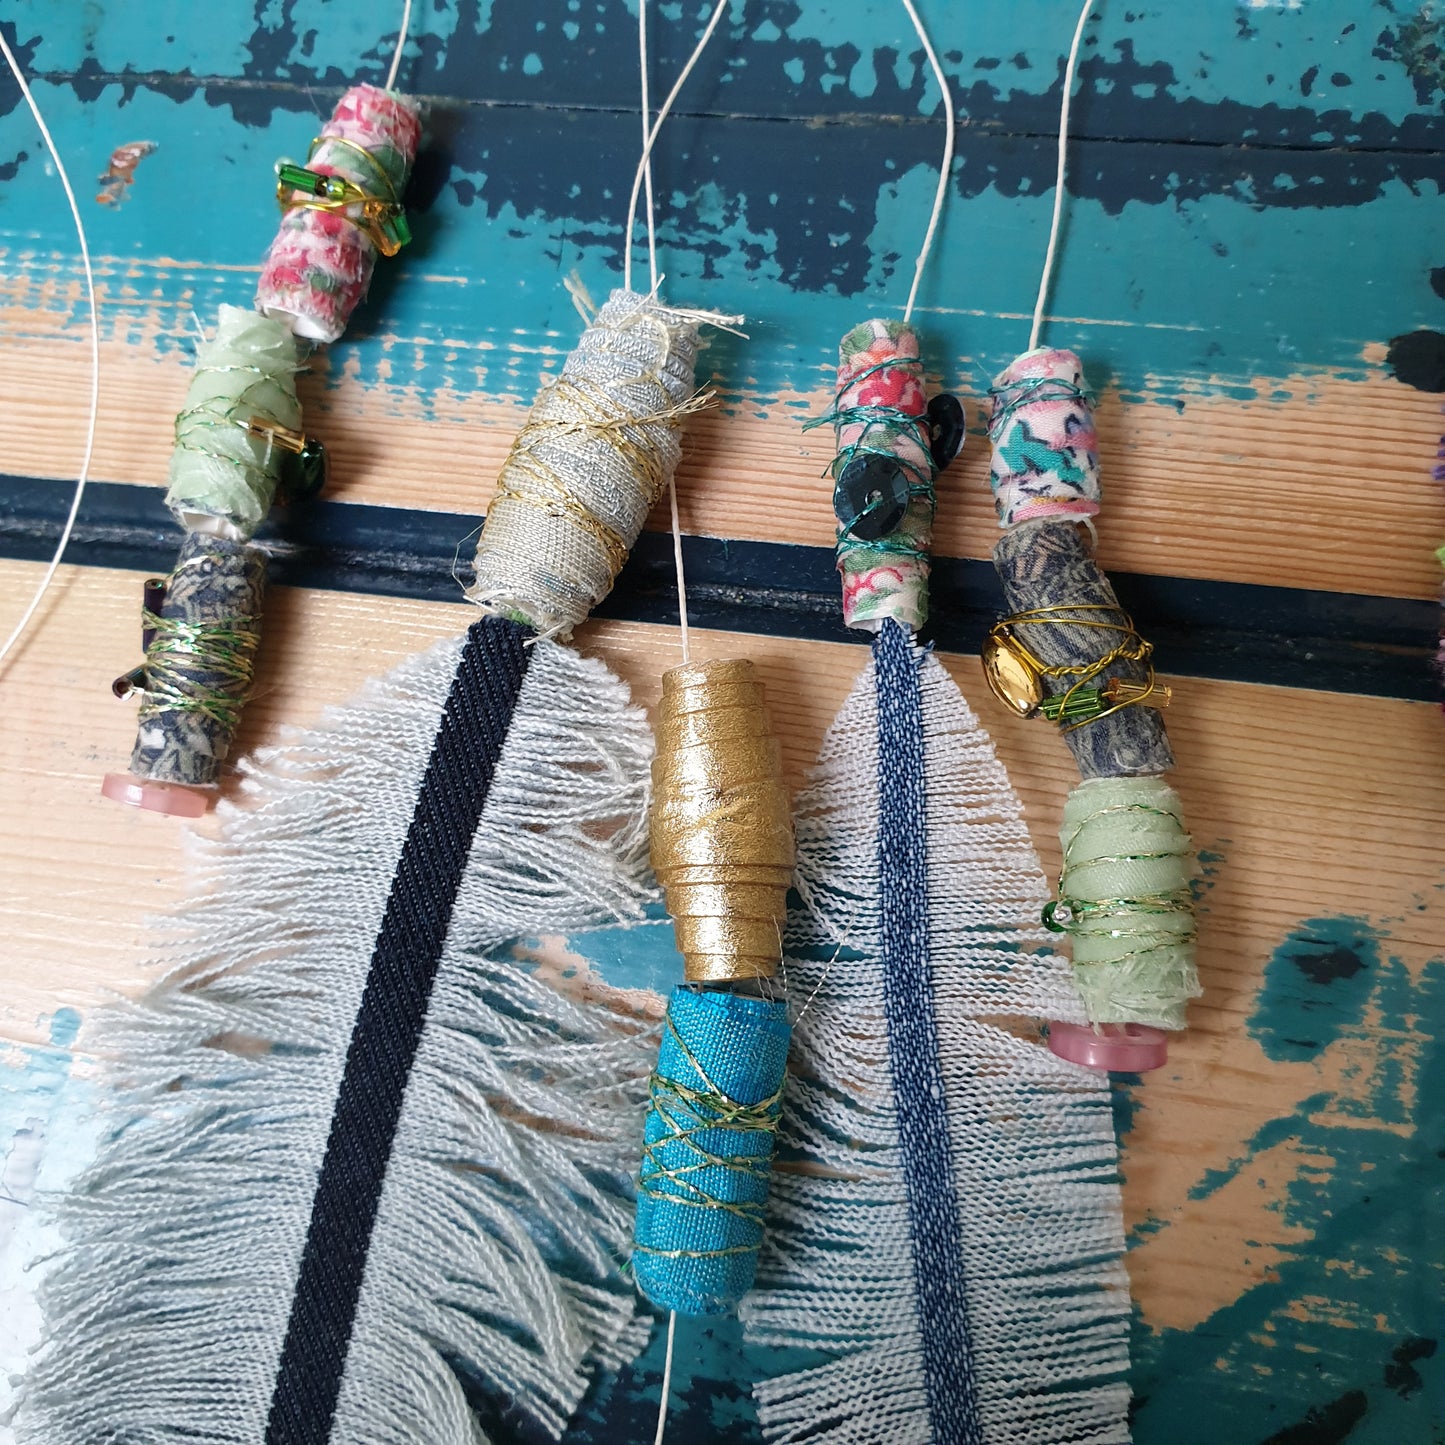 Feathers & Beads Mobile: #peaceandcraft Workshop Project 2020